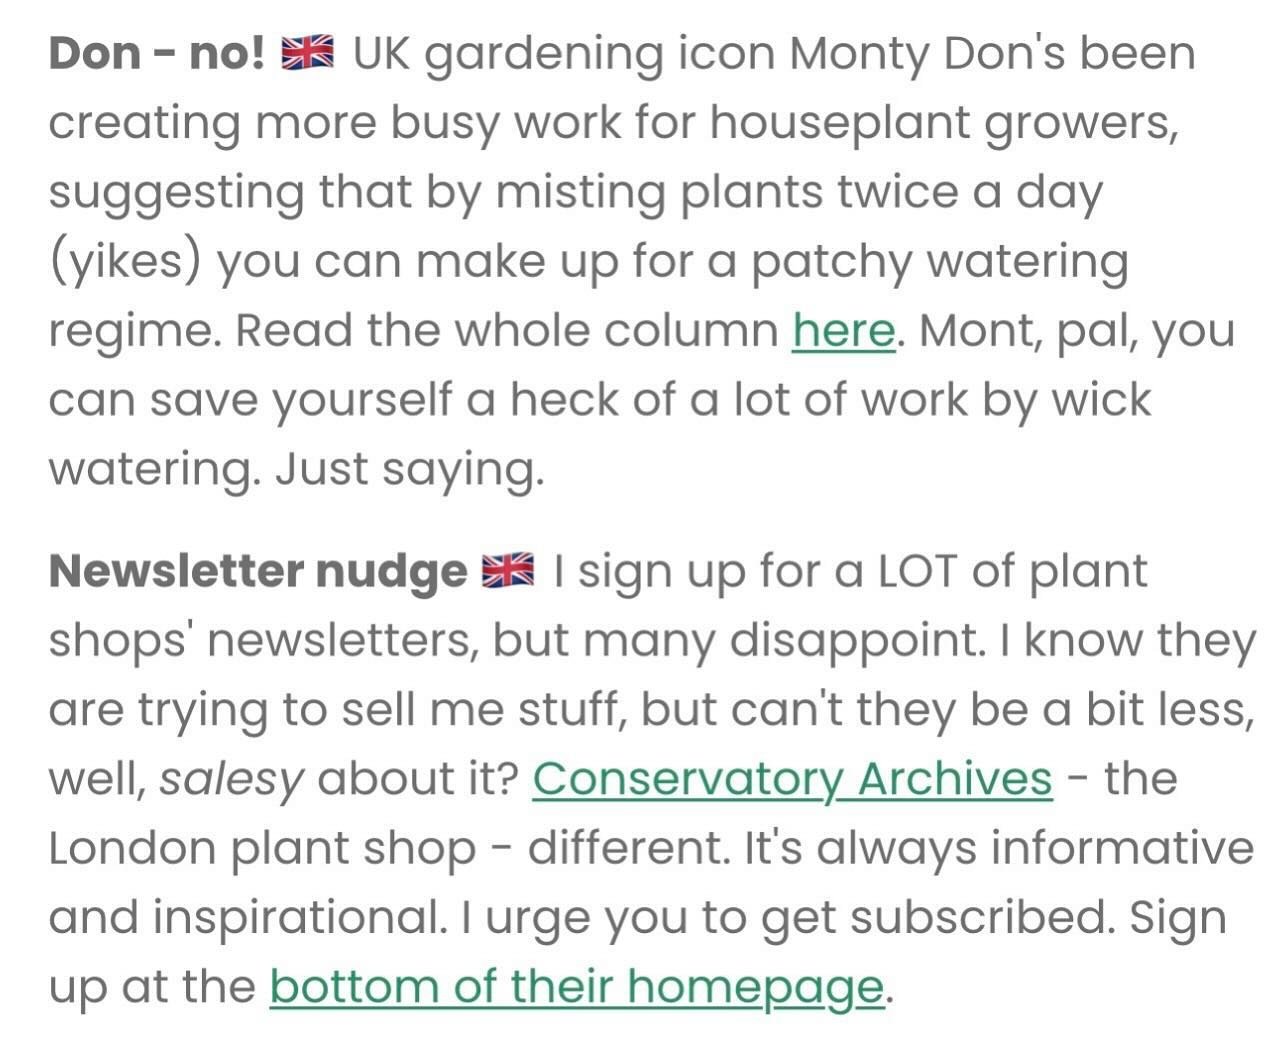 This week&rsquo;s edition of my newsletter The Plant Ledger (actually last week&rsquo;s - it came late on Monday owing to the Easter holidays) is available on my website if you aren&rsquo;t subscribed. It includes me offering Monty Don advice on hous